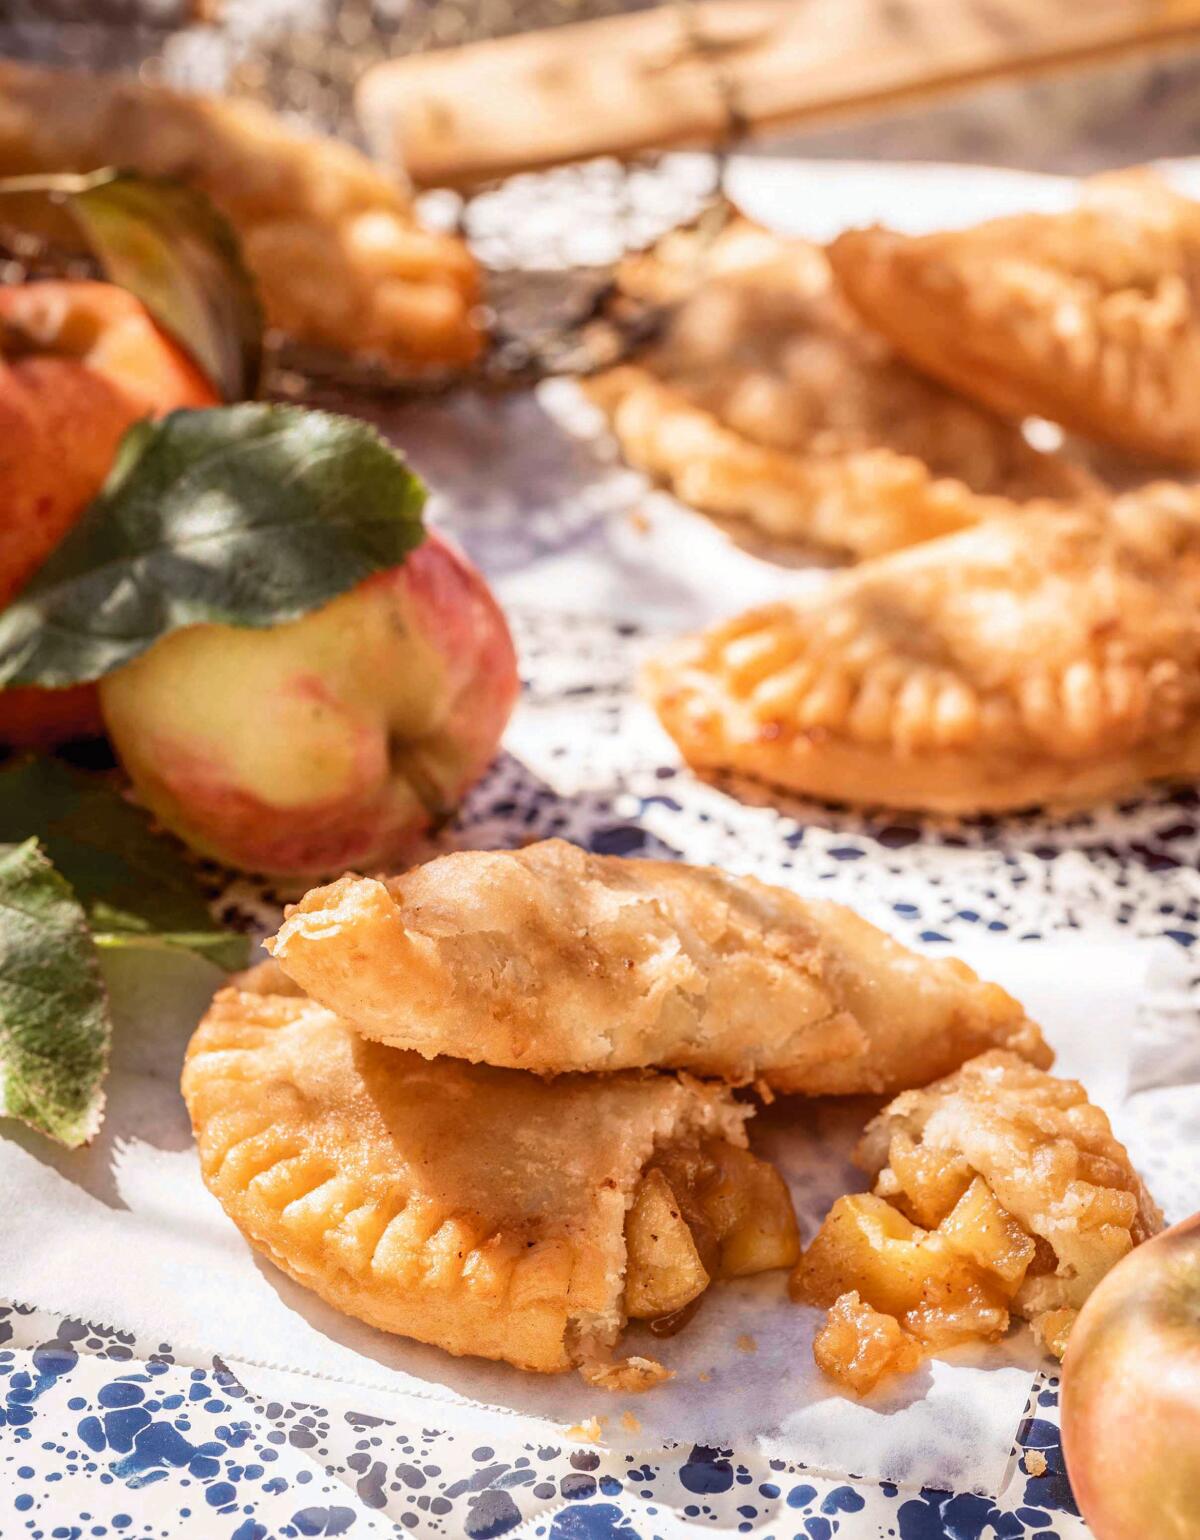 This cover image released by Mariner Books shows a recipe titled "Jack's Fried Pies," from the cookbook "Trisha’s Kitchen: Easy Comfort Food for Friends and Family” by Trisha Yearwood. (Ben Fink/Mariner Books via AP)